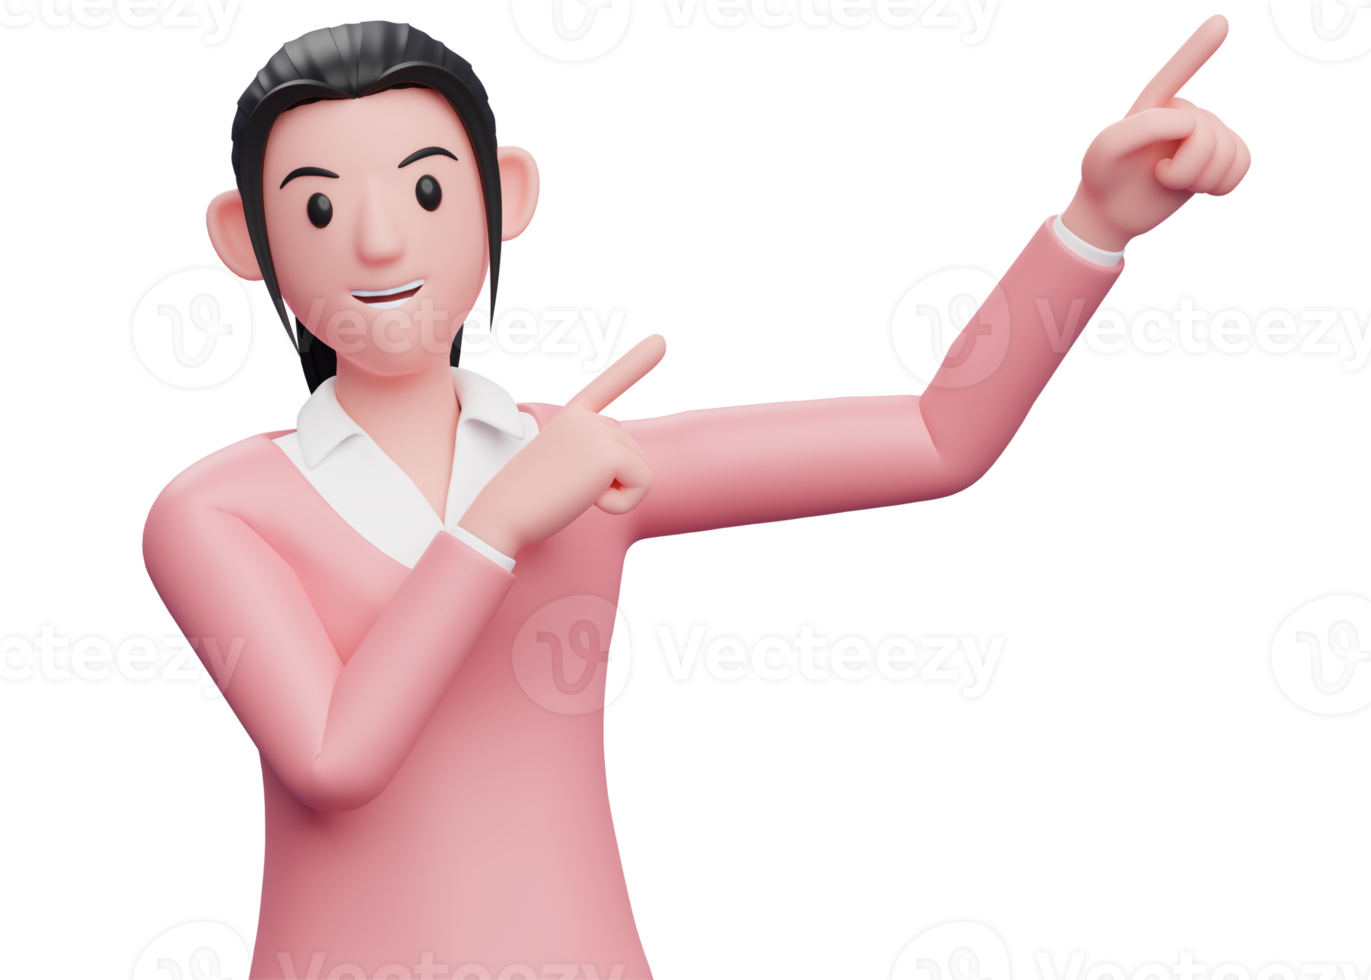 3d sweet girl in pink sweater raising both hands pointing to the top right corner, 3D render sweet girl character illustration png